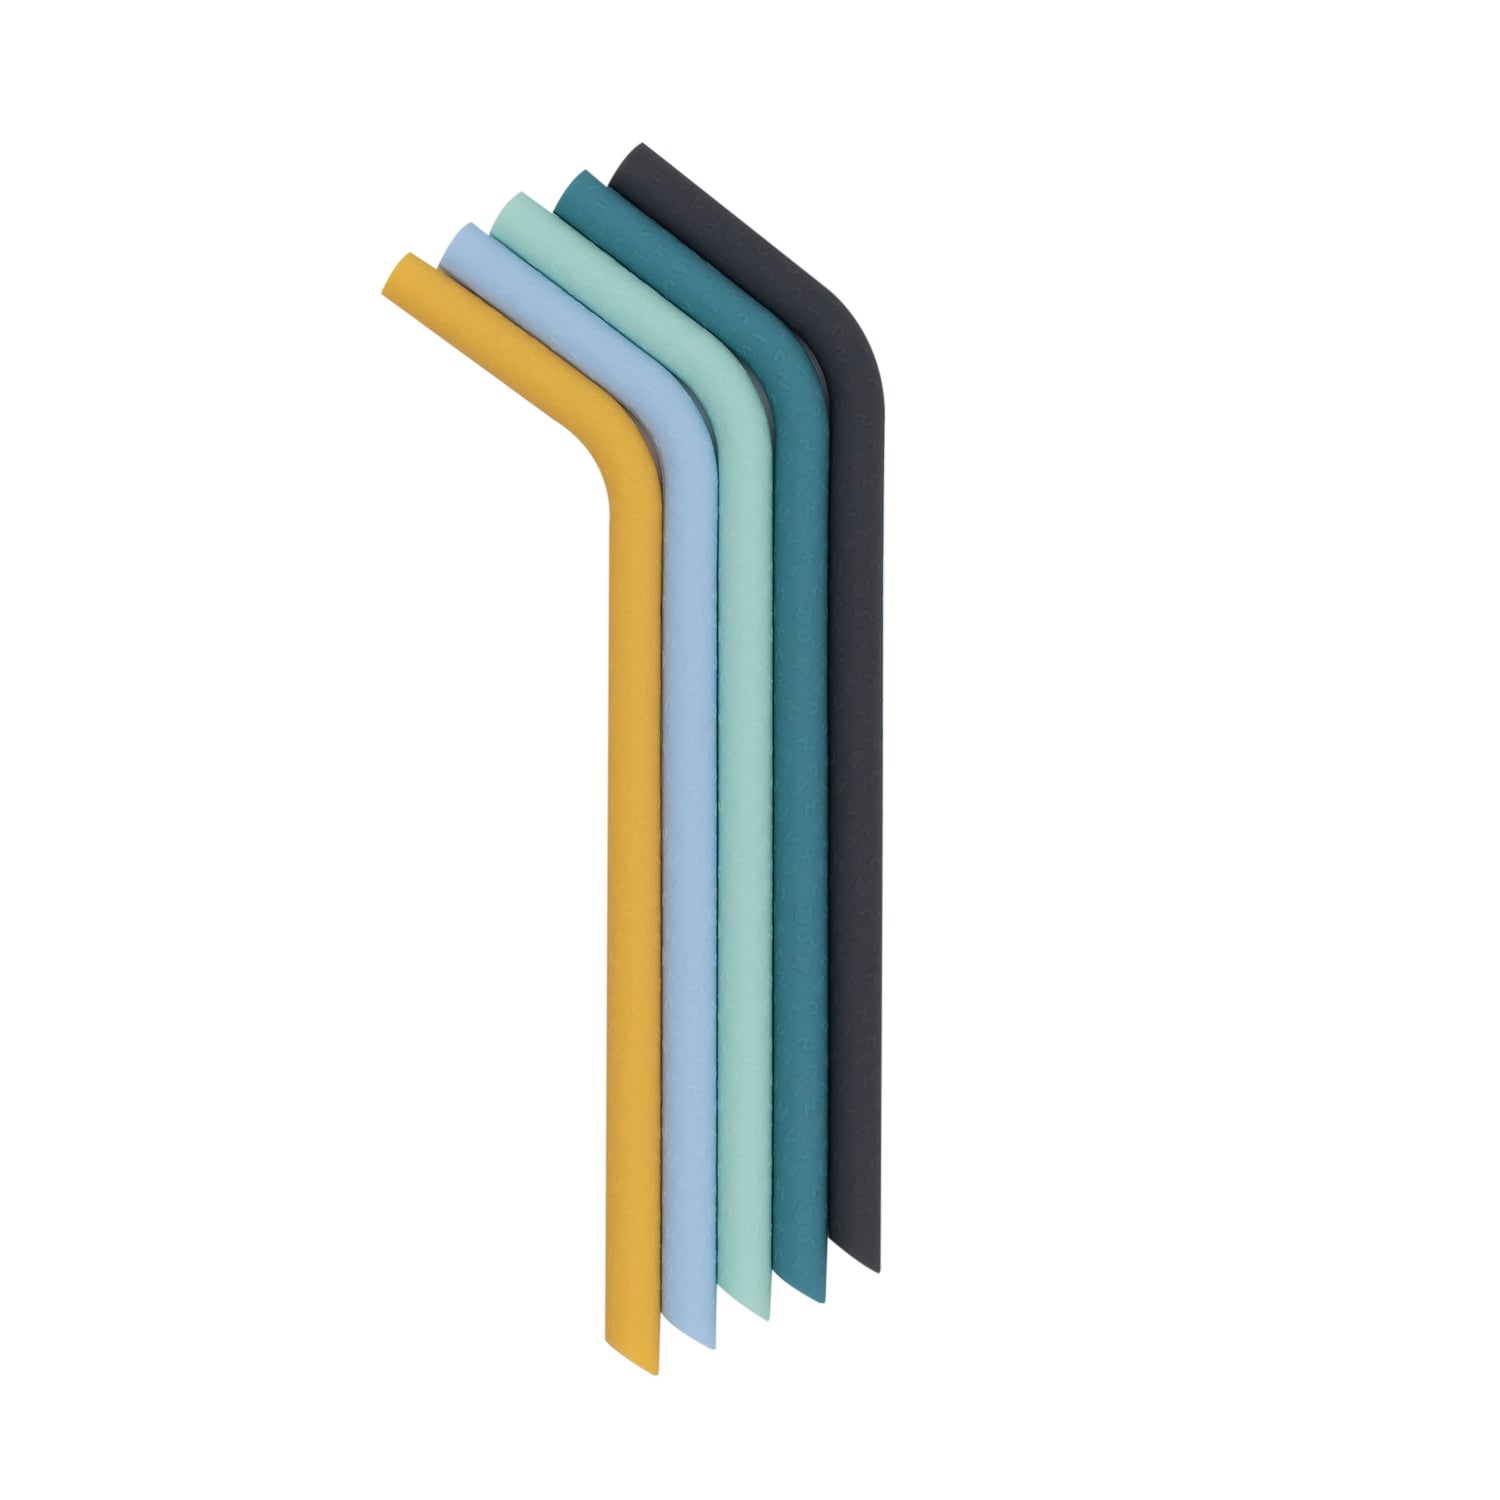 Bendie Straws in Blues and Yellows